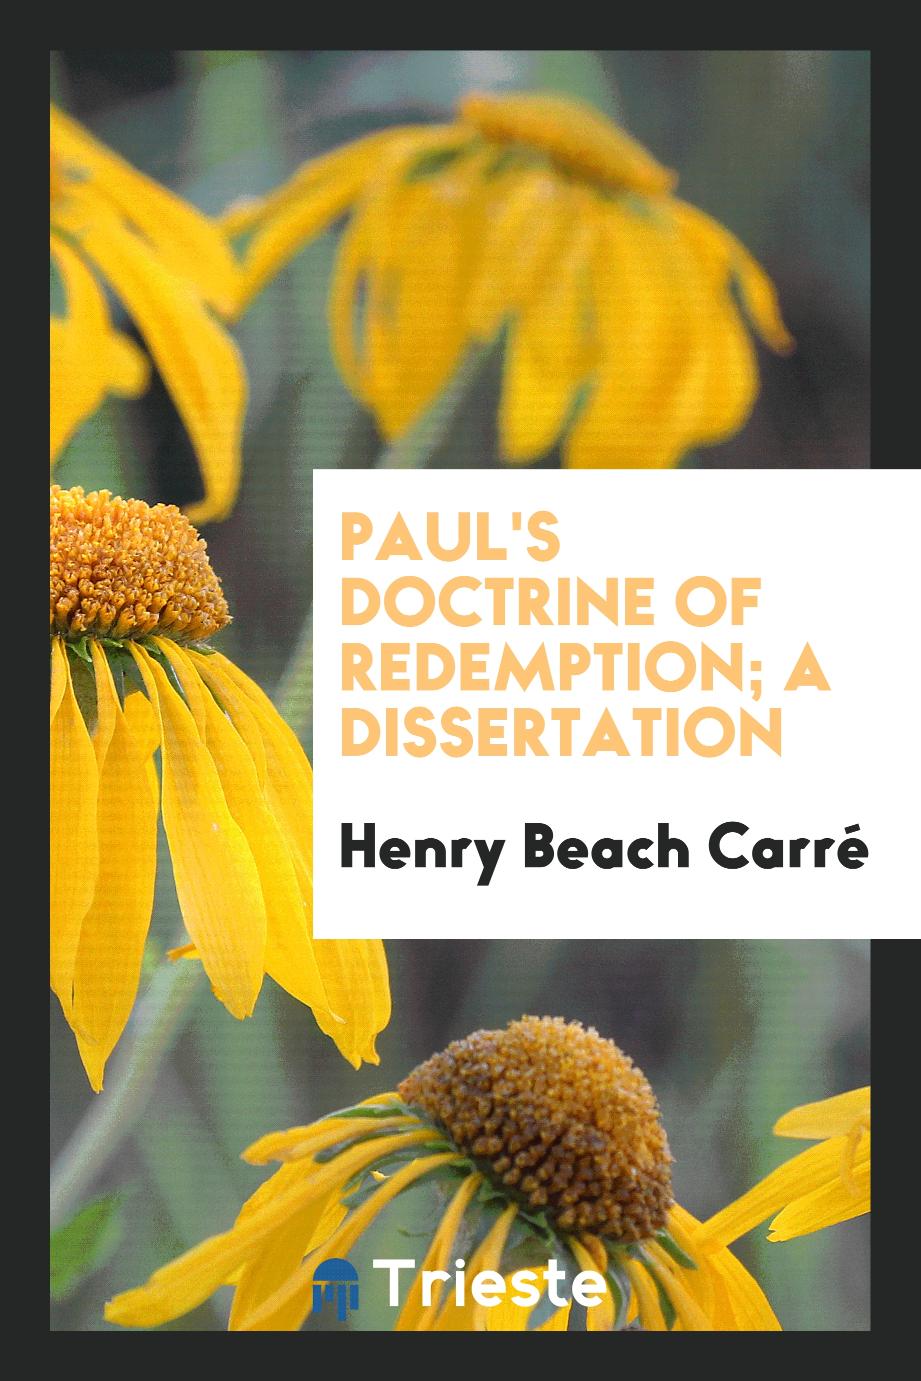 Paul's doctrine of redemption; a dissertation